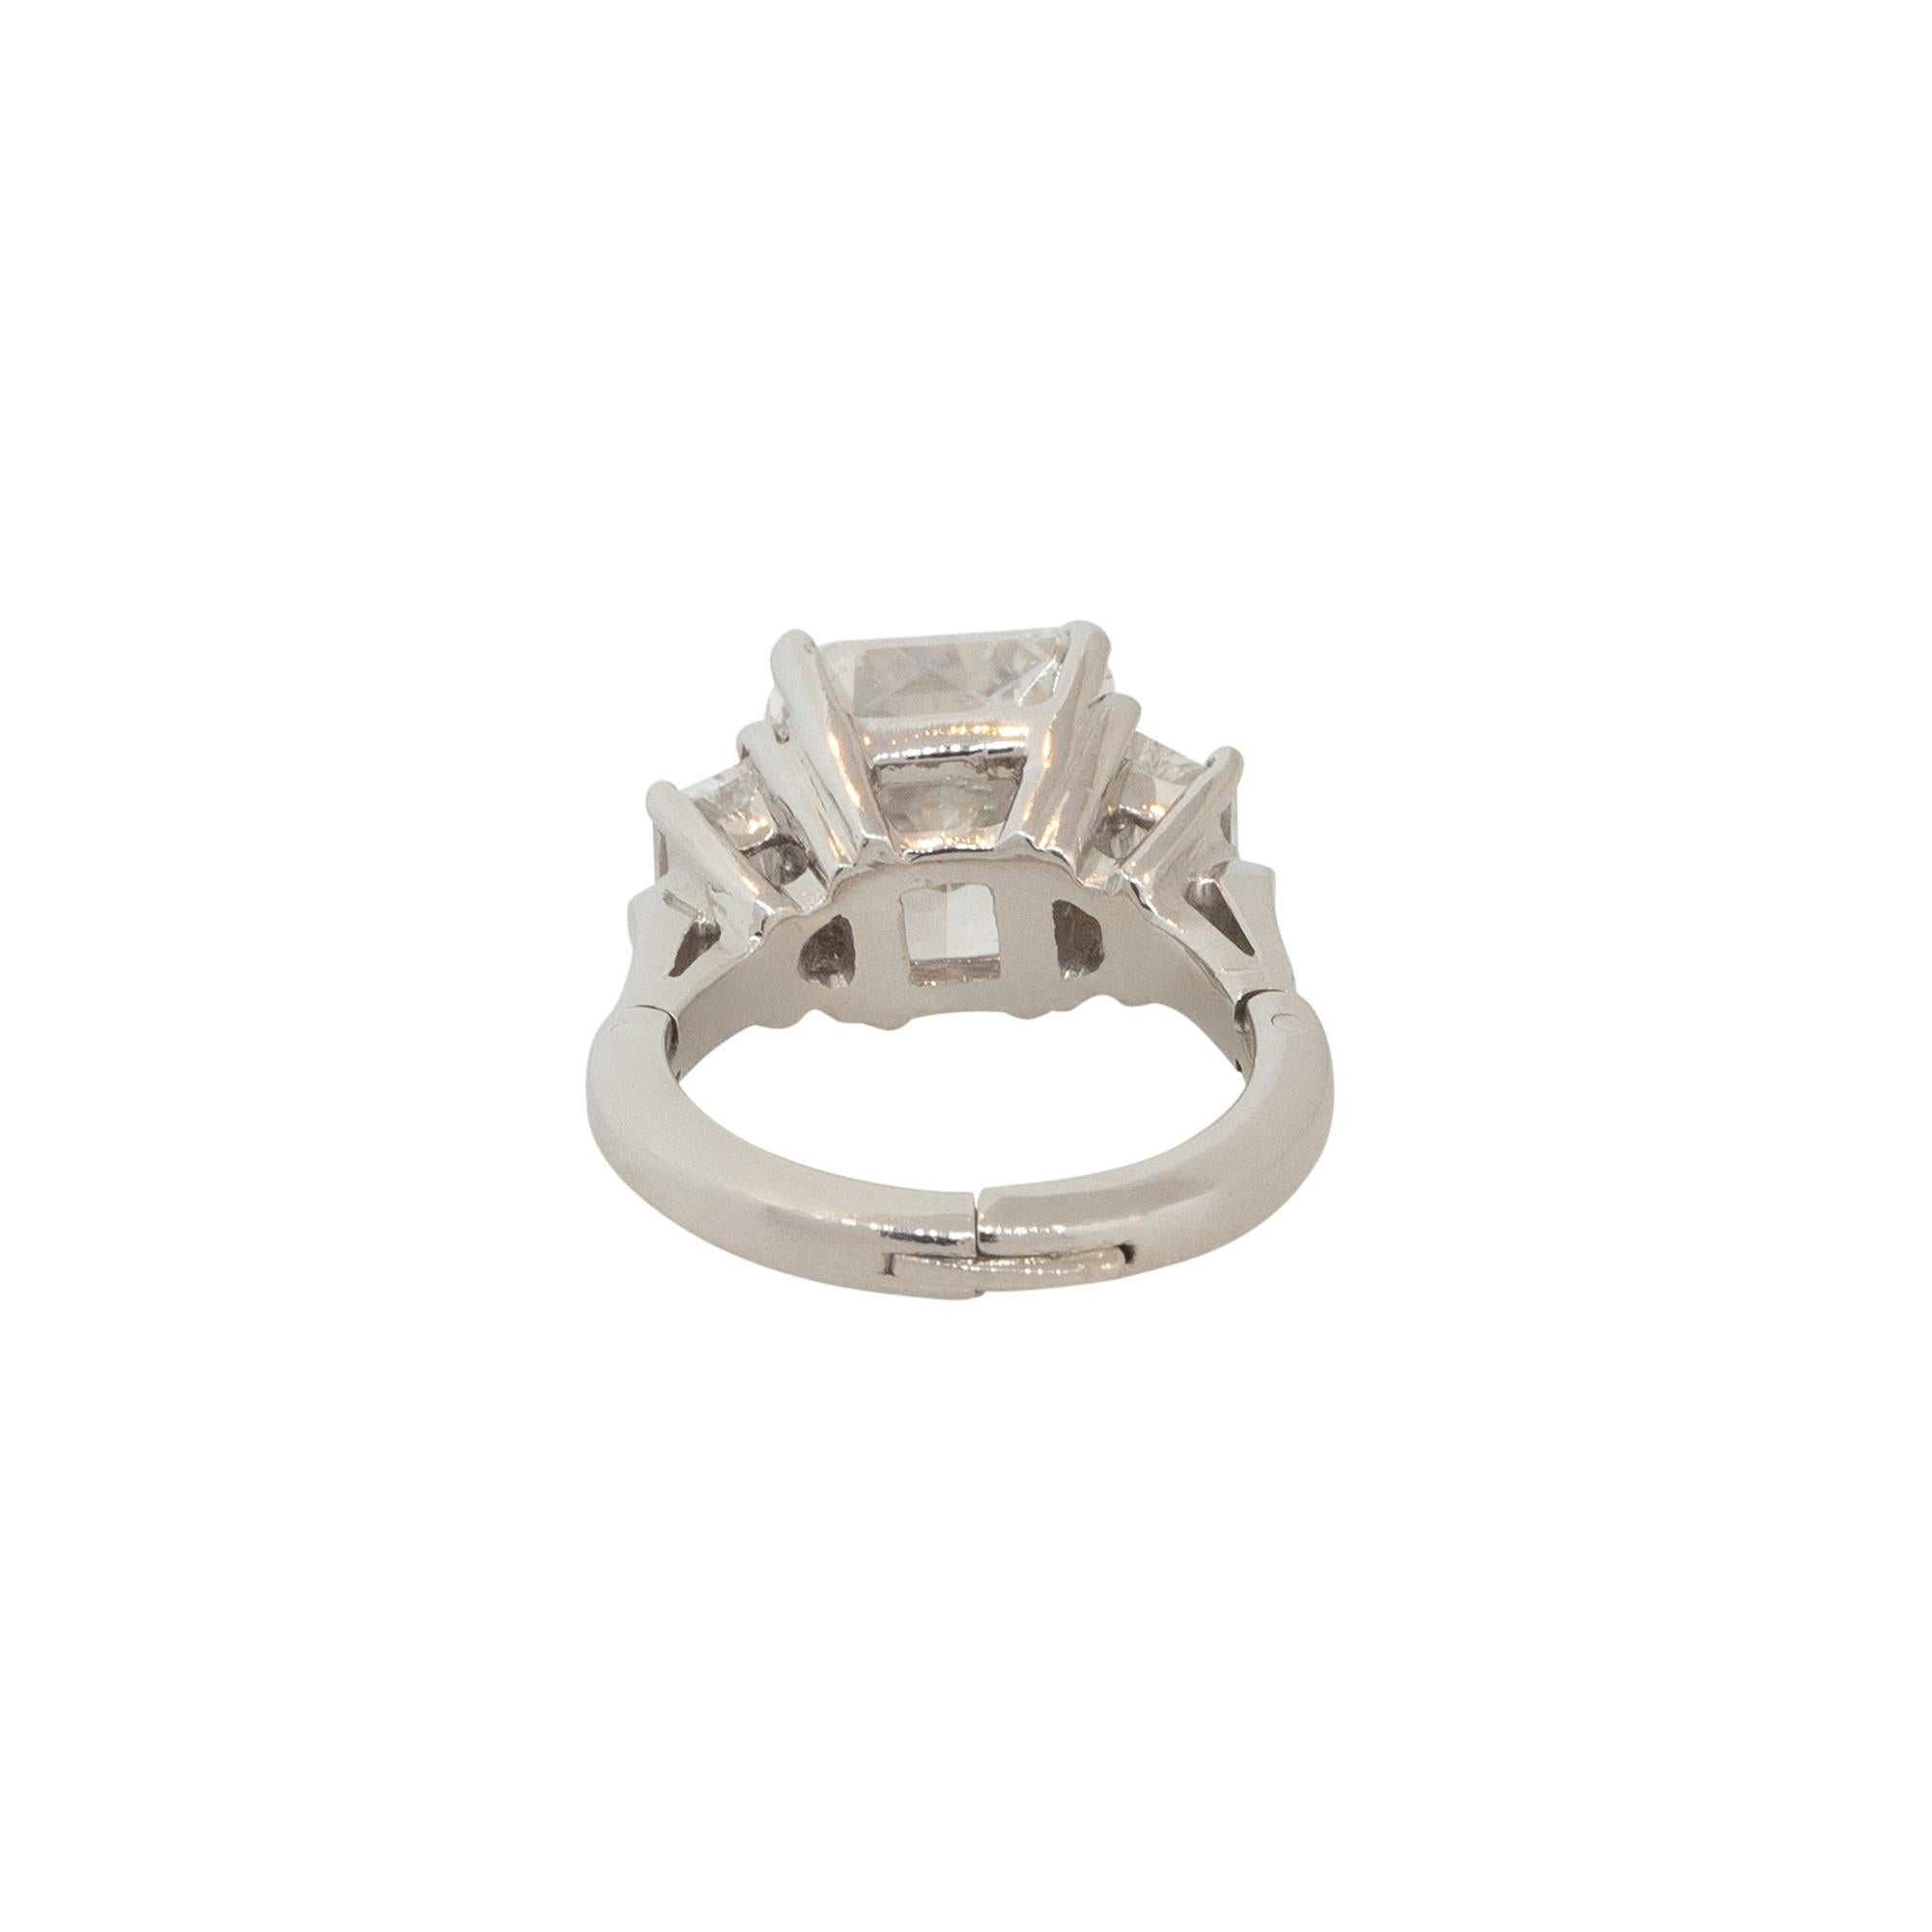 Details for this engagement ring: GIA Certified Platinum 6.53 Carat Radiant Cut Diamond Engagement Ring

Material: Platinum
Diamond Details: The center stone is a 5.03 carat Radiant Cut Diamond. The center diamond is E in color and SI1 in